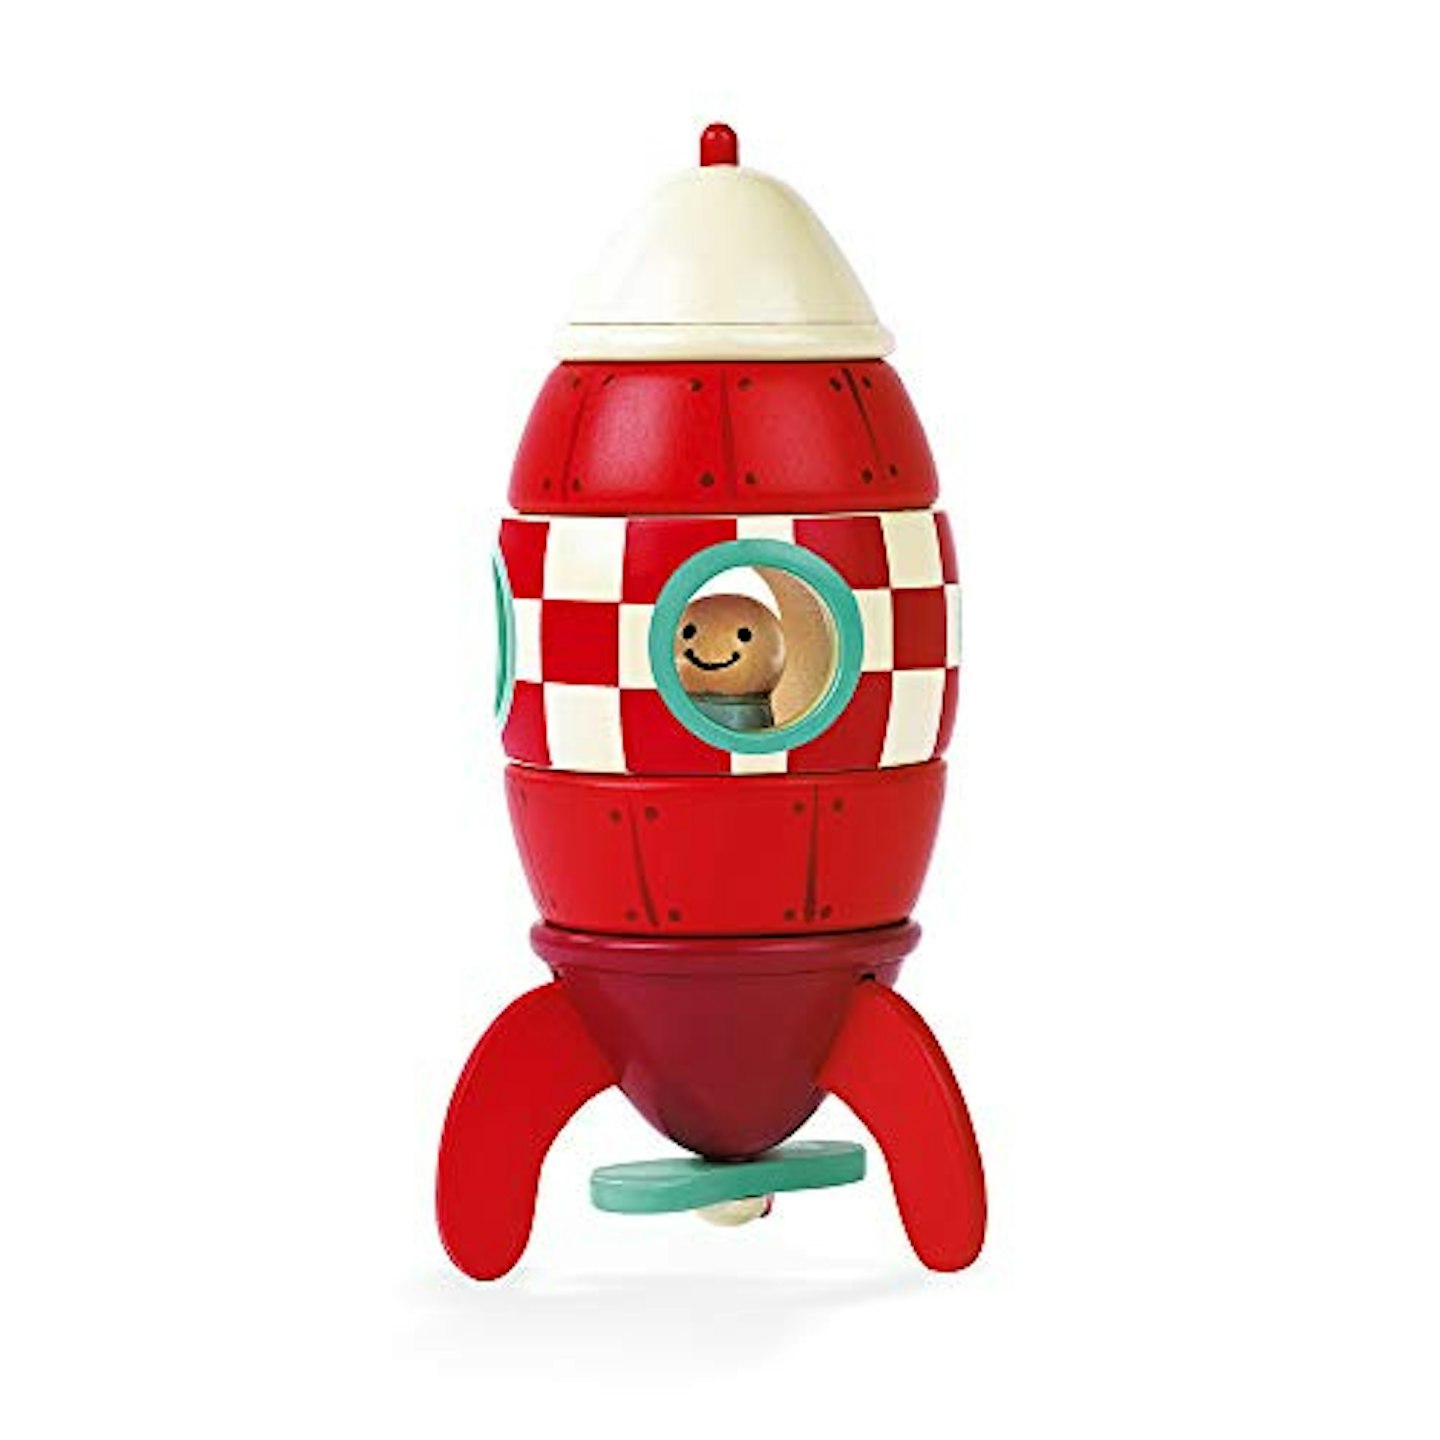 The best toy rockets for blast off